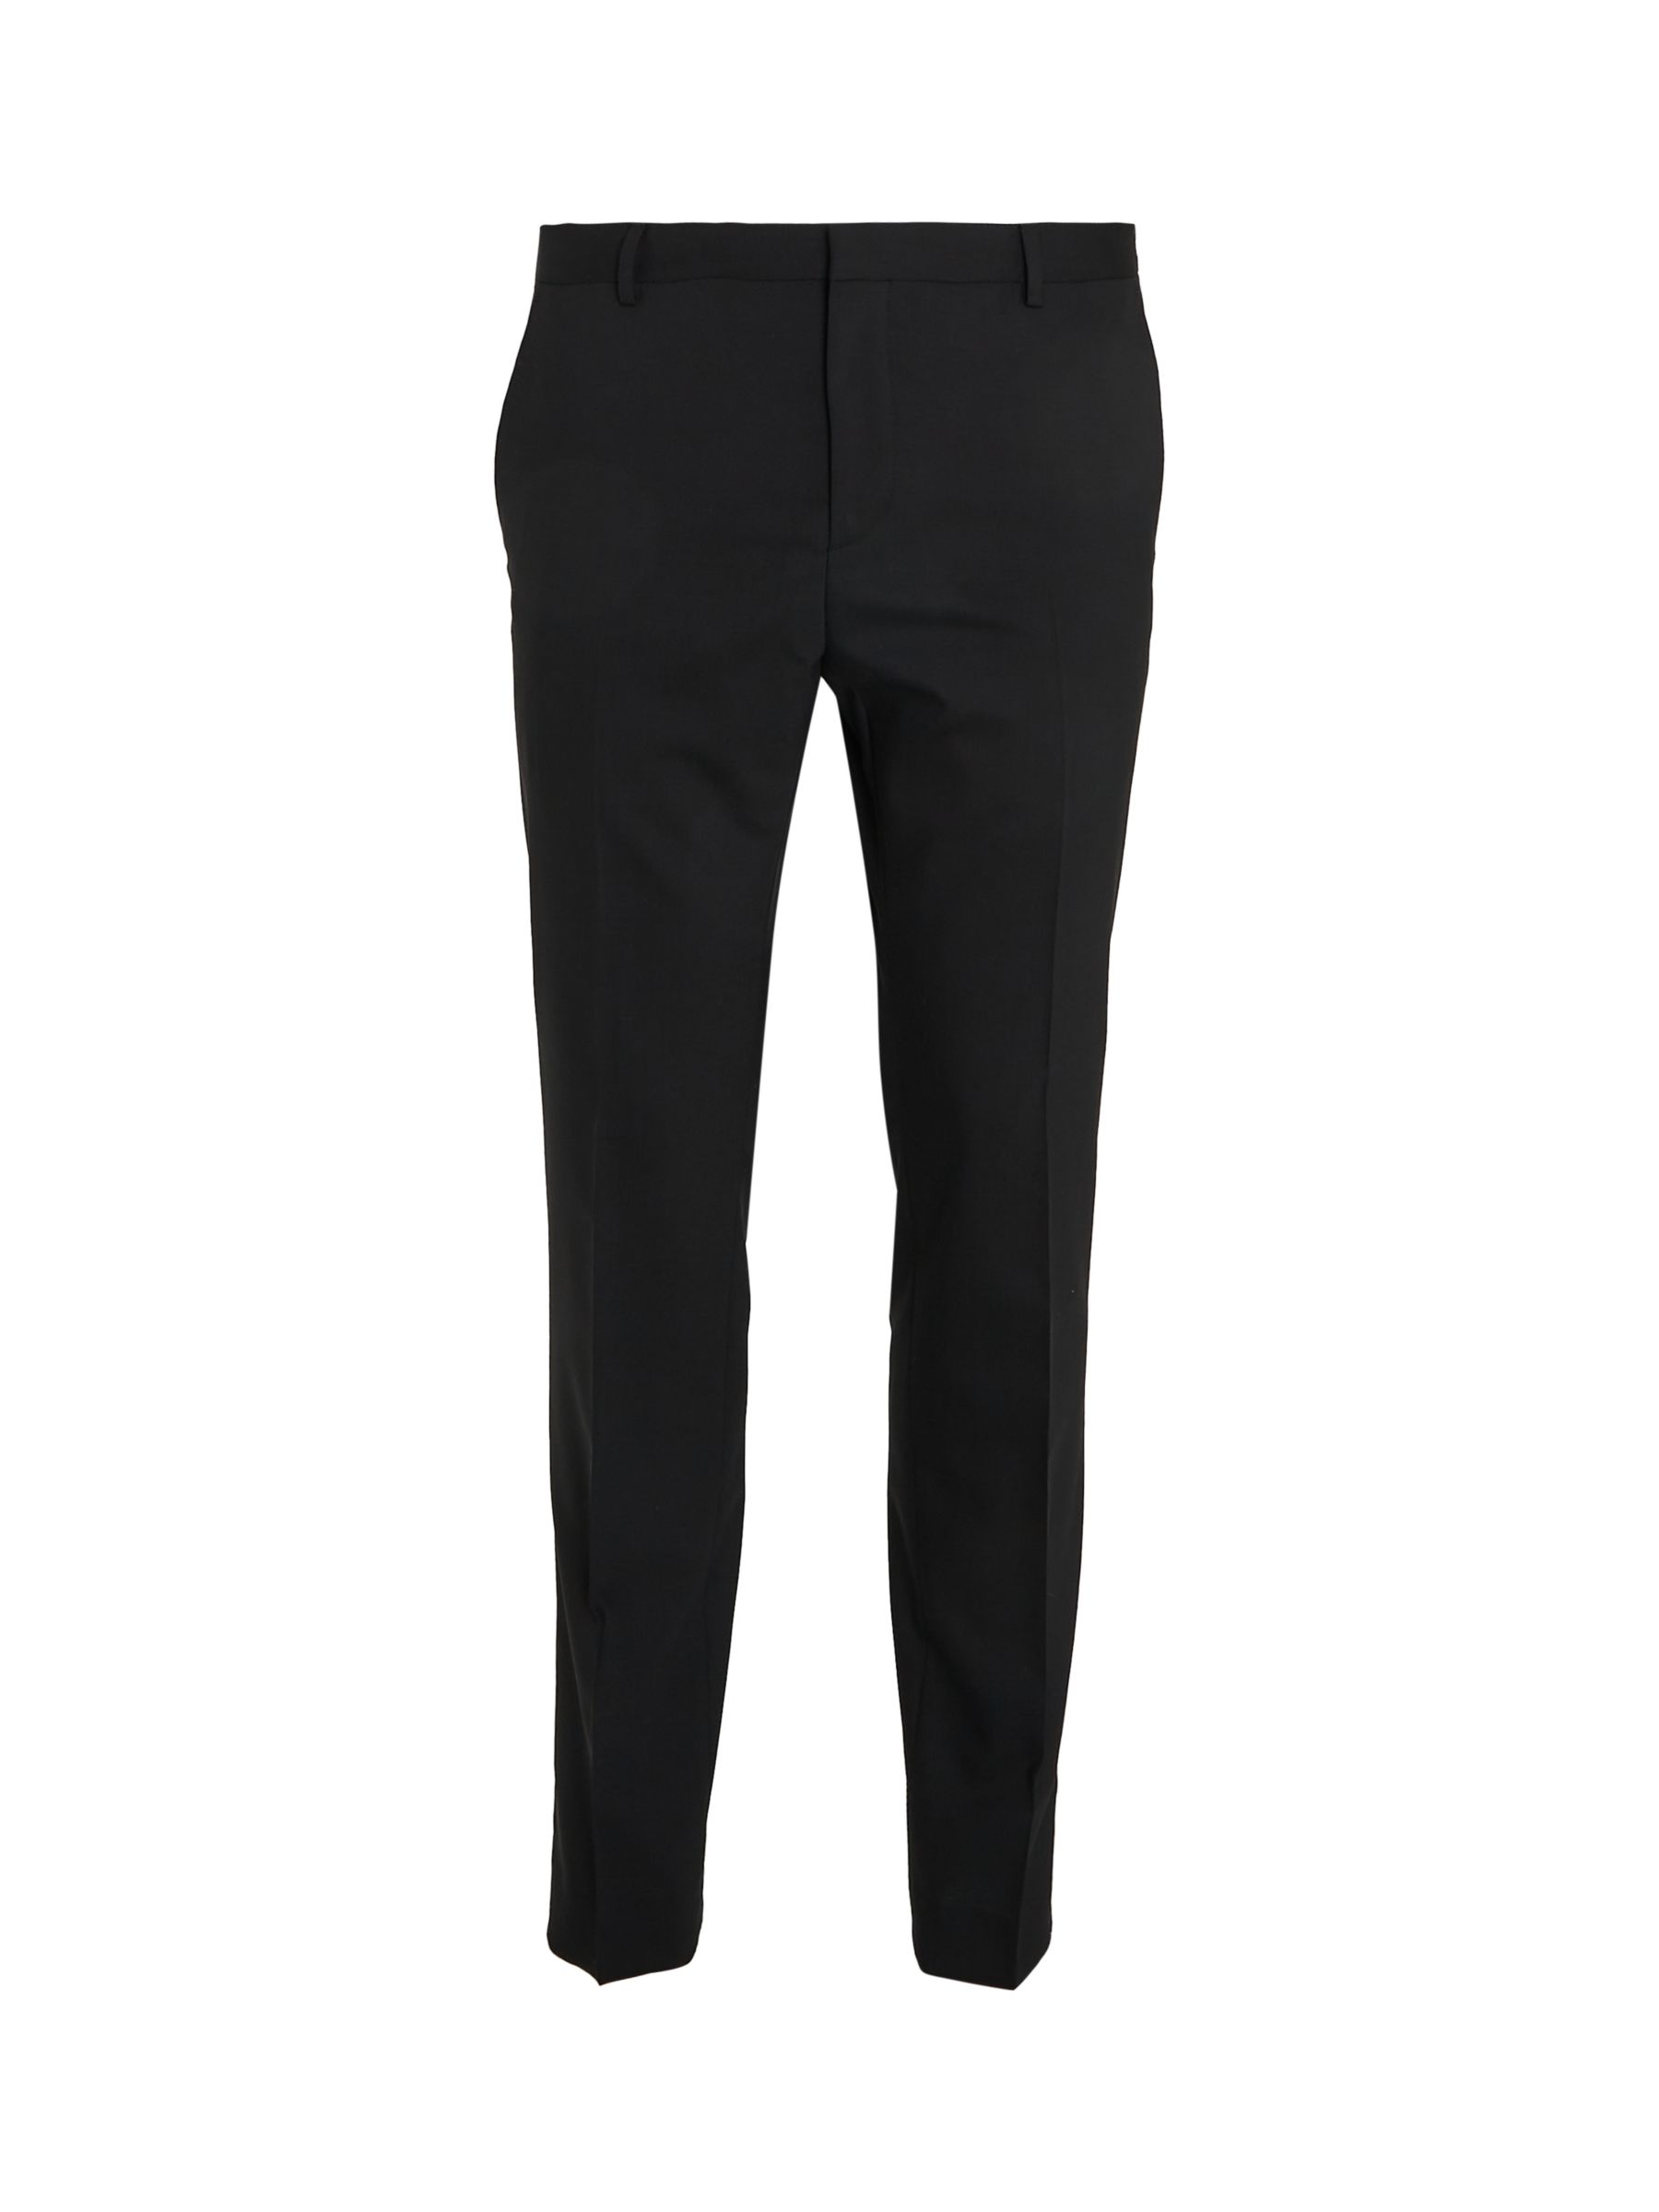 Calvin Klein Slim Wool Stretch Suit Trousers, Perfect Black, 34